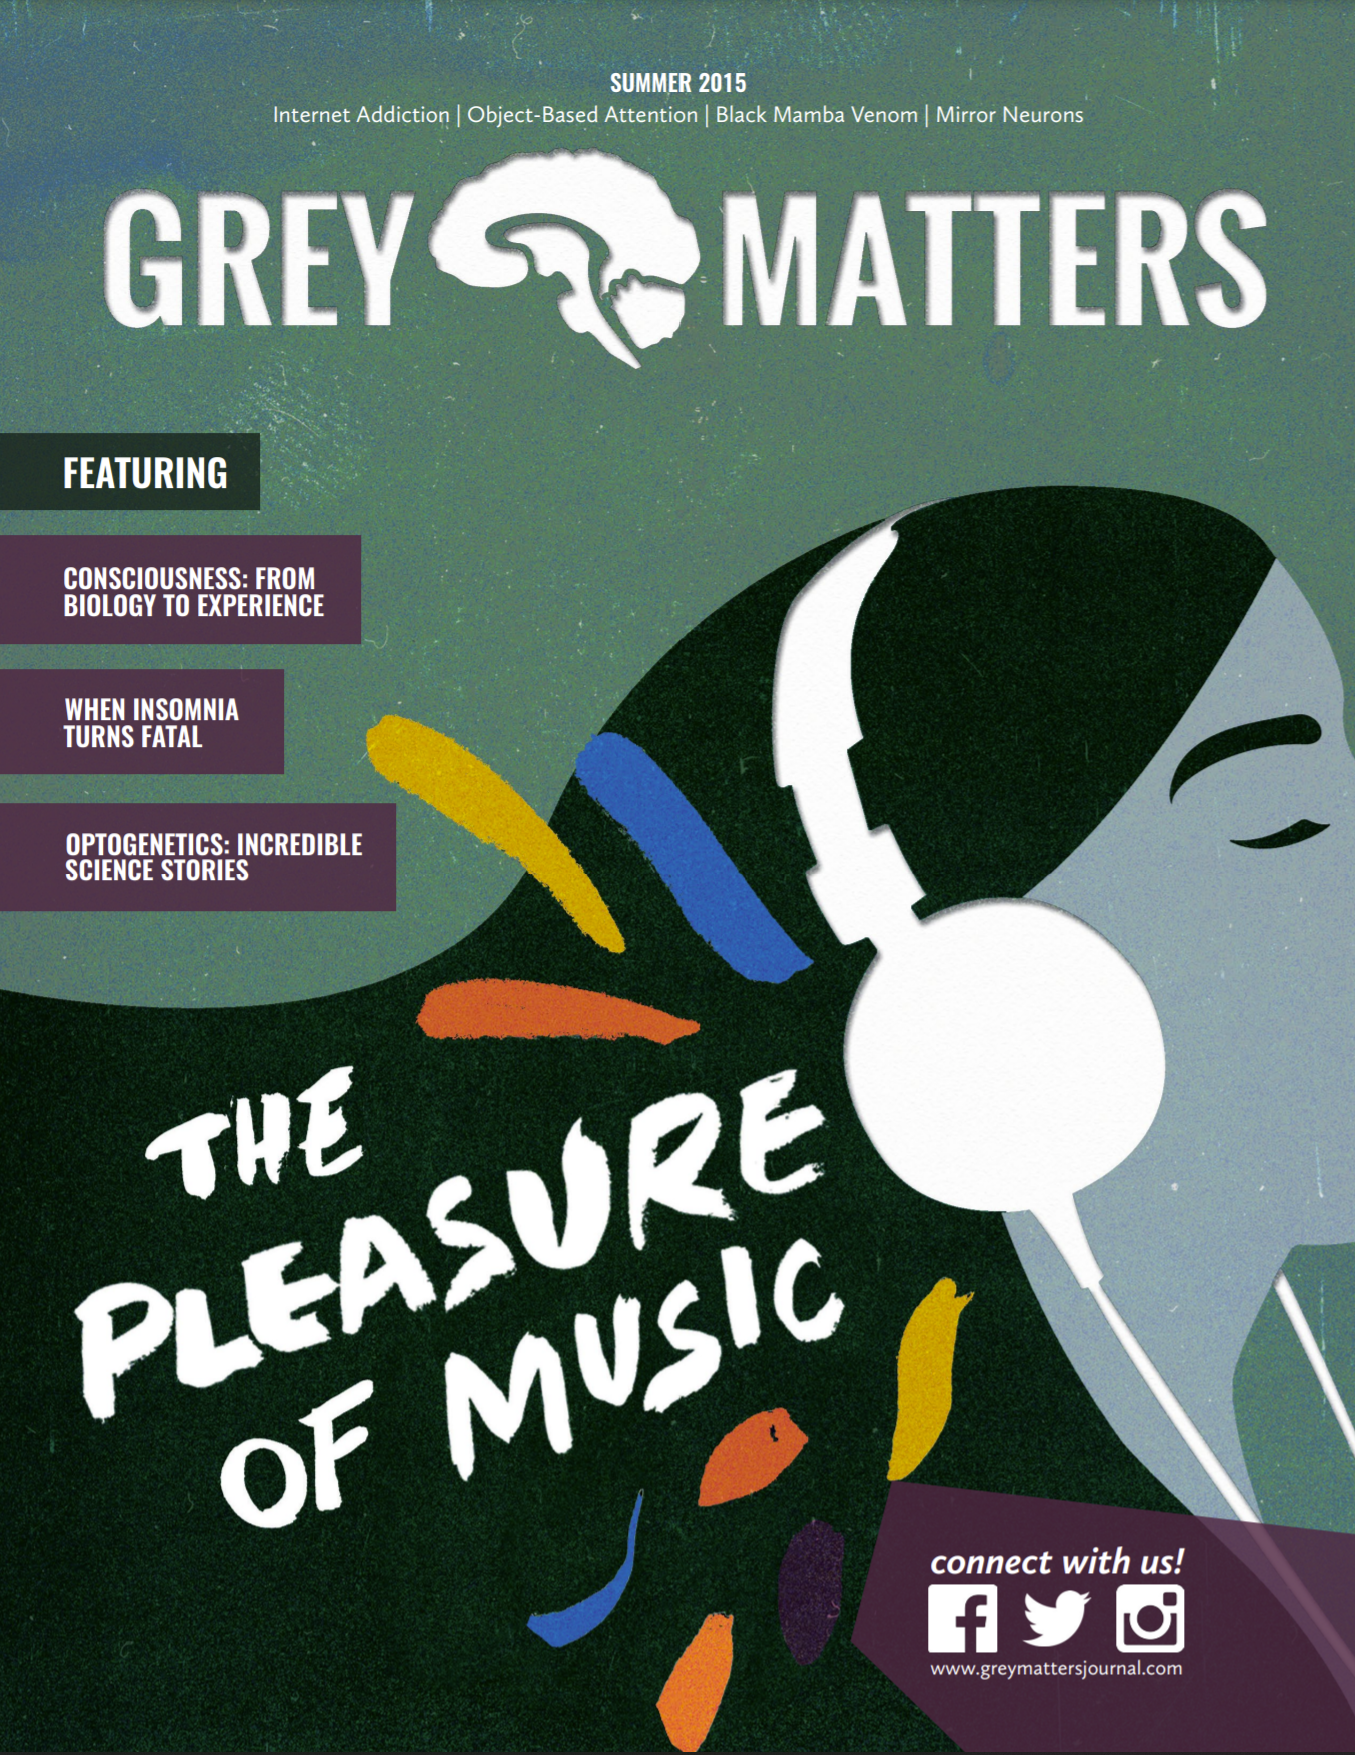 Grey Matters Journal Issue 5